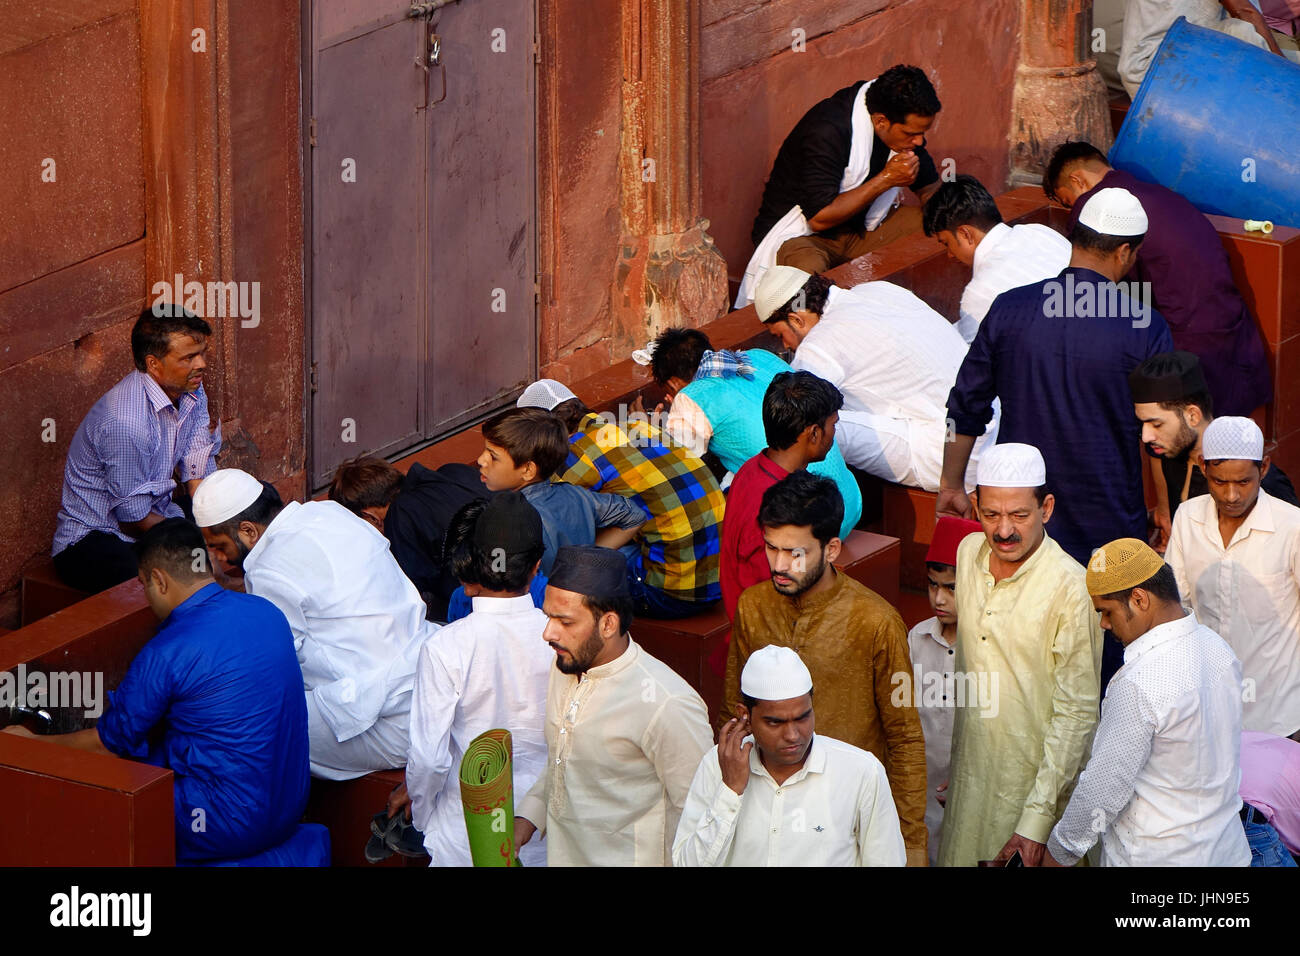 Crowd of lots of Muslim people praying namaz on occasion of  Eid-Al-Fitr at old Delhi Mosque jama masjid Stock Photo